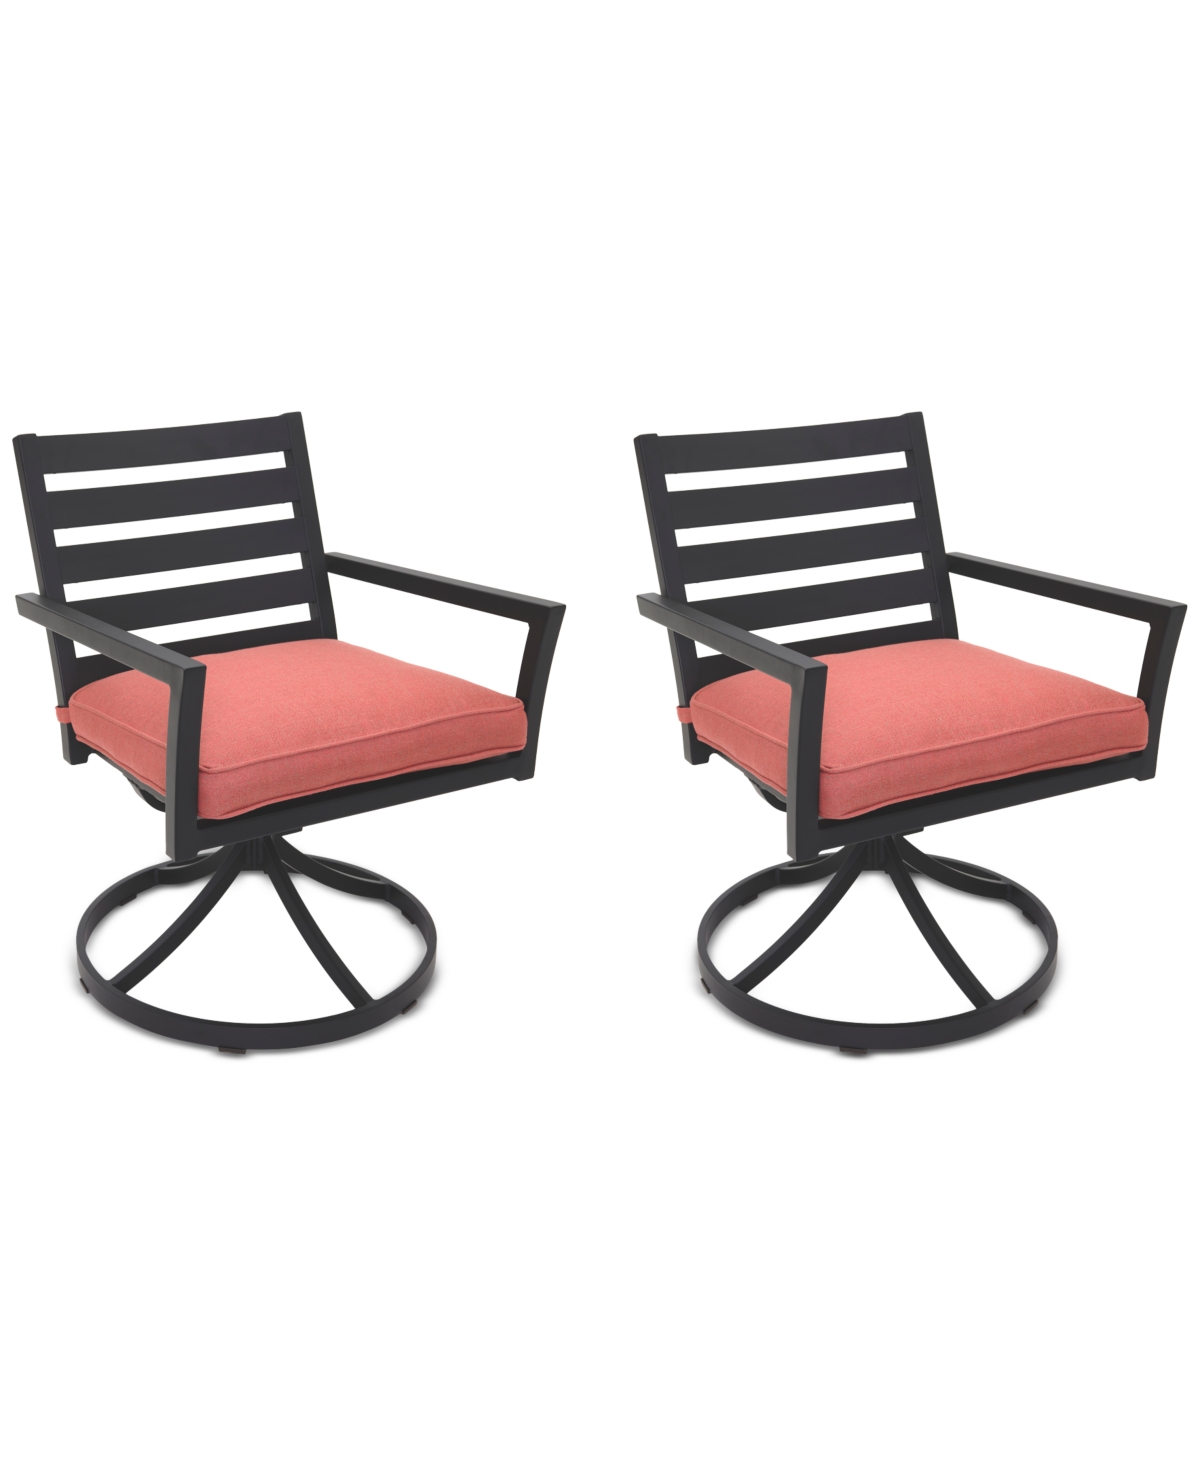 Agio Astaire Outdoor 2-pc Swivel Chair Bundle Set In Peony Brick Red